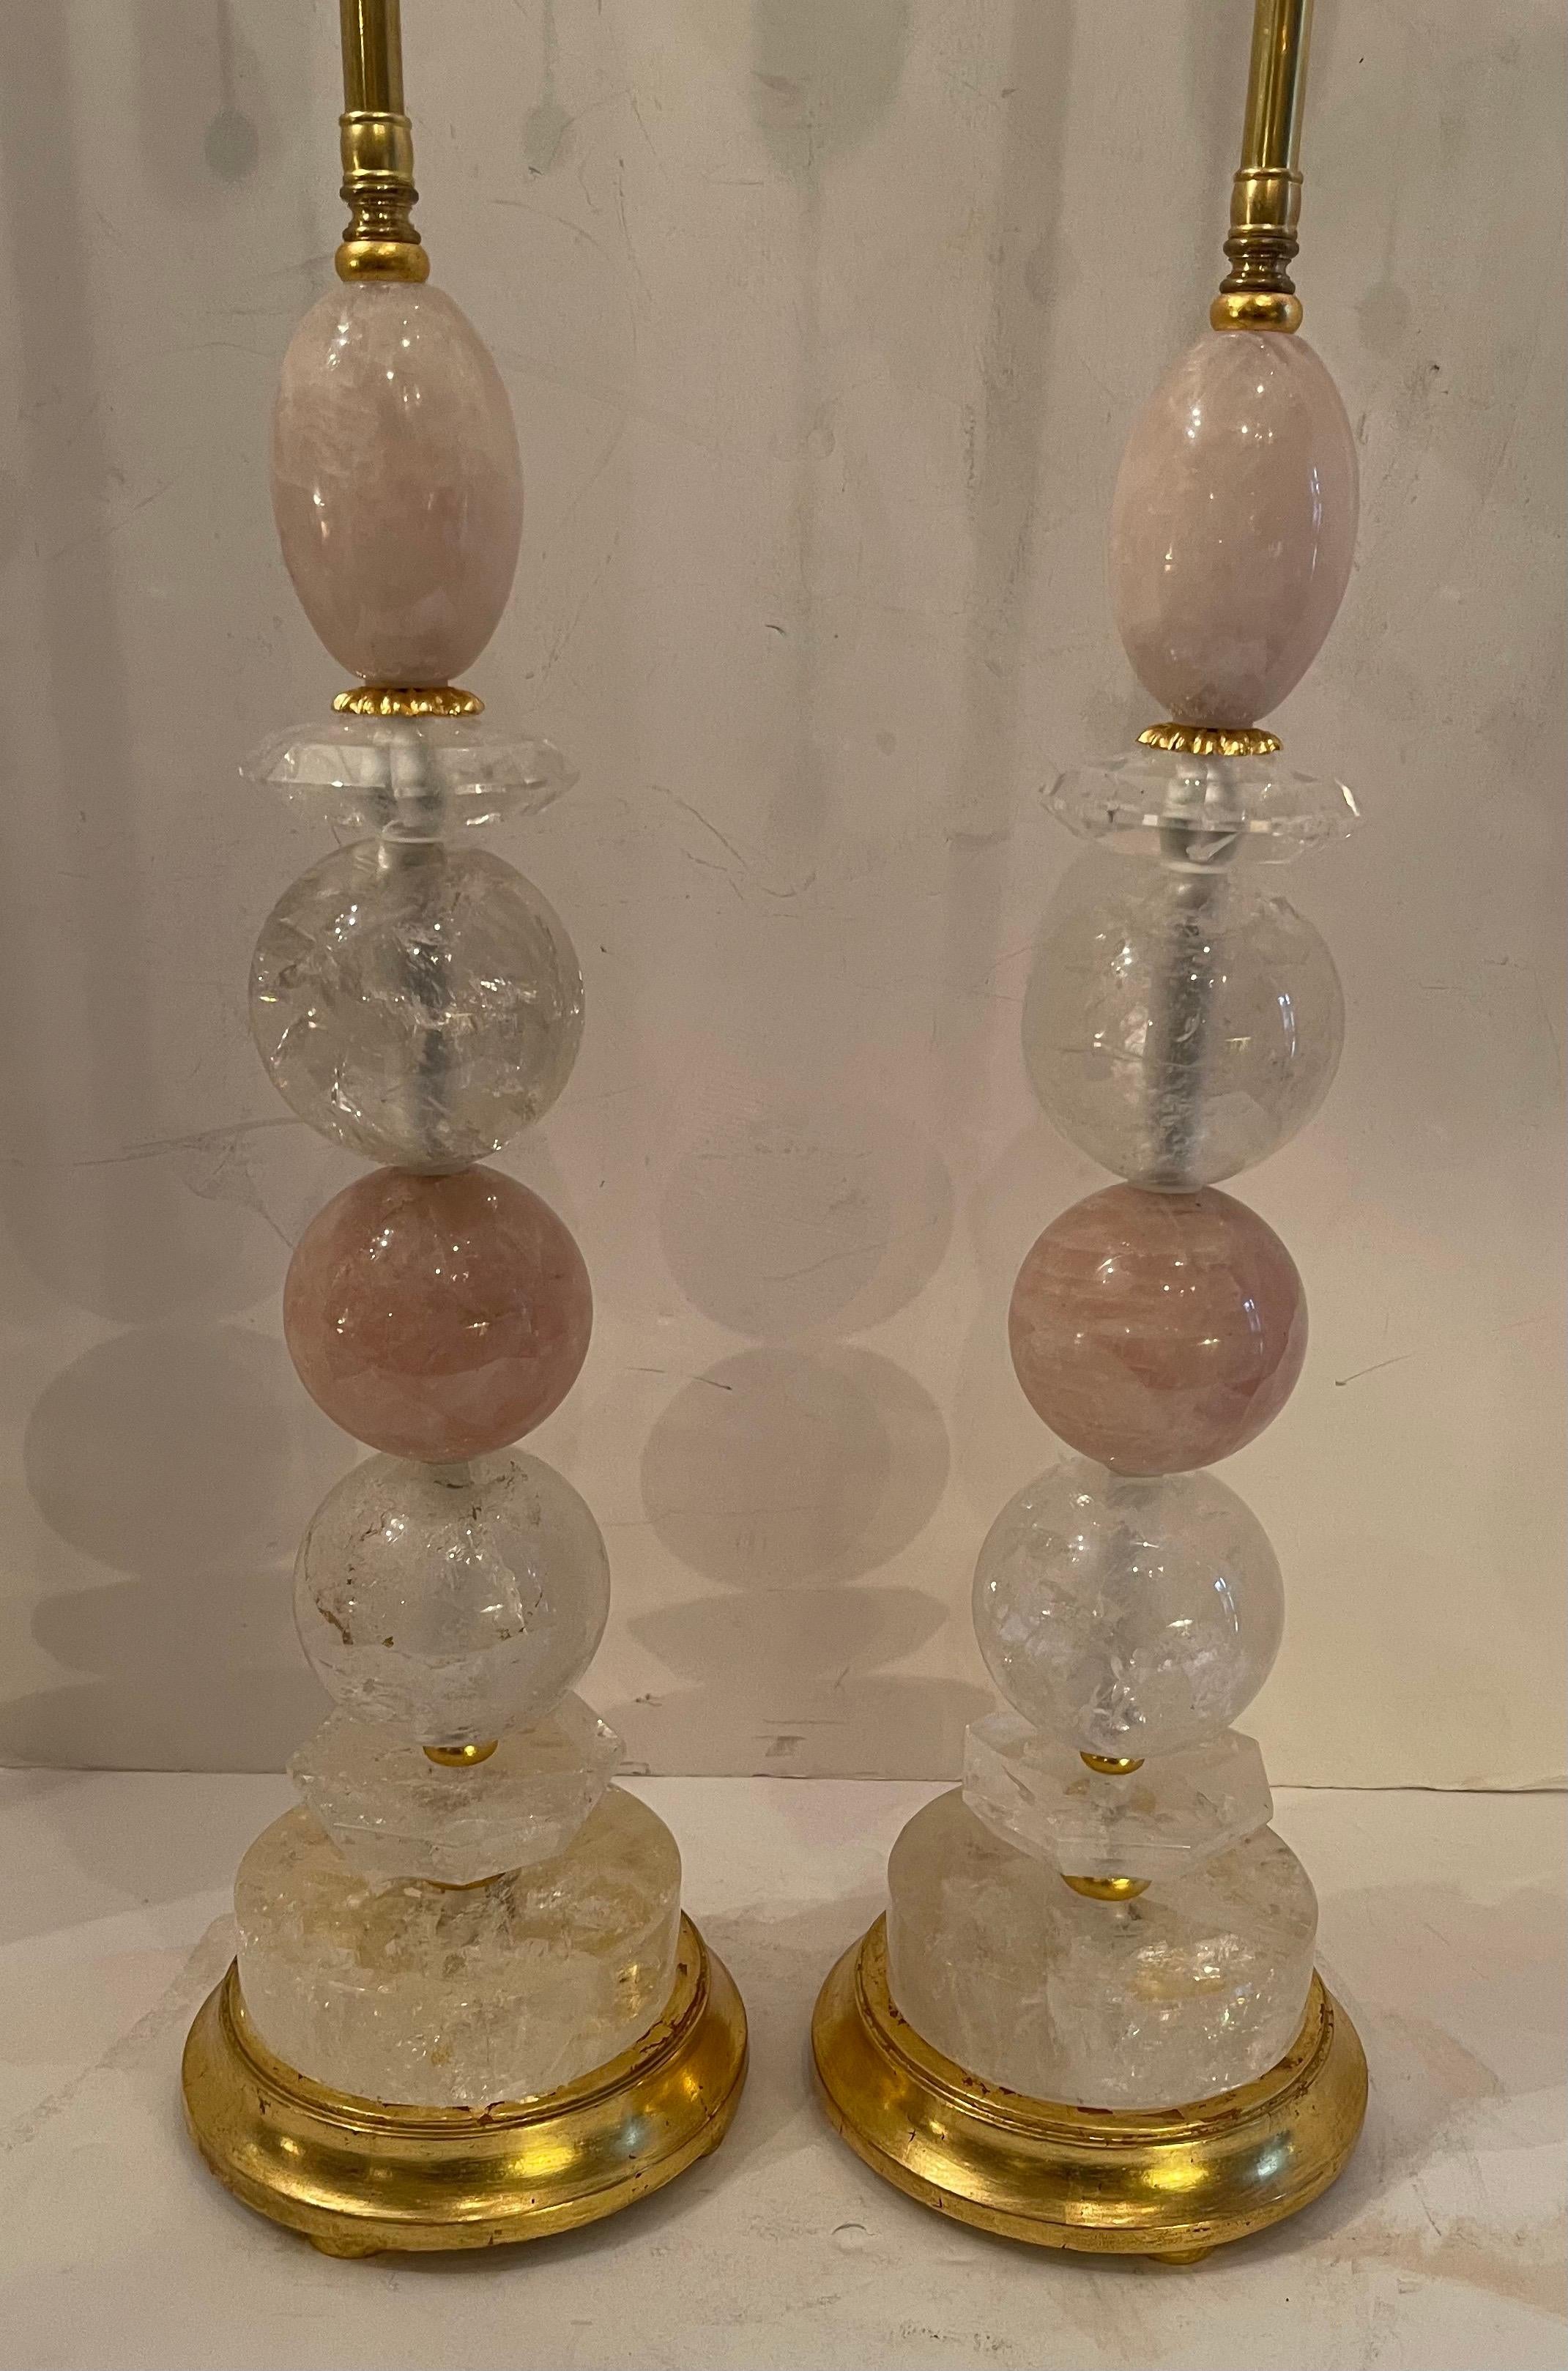 A Wonderful Pair Of Mid-Century Modern Large Various Forms Of Rock Crystal And Rose / Pink Quartz Crystal Stacked And Raised On Gold Leaf Wood Bases, These Are A Rare & Fine Pair Of Table Lamps In The Manner Of Maison Baguès.
Each With Two New